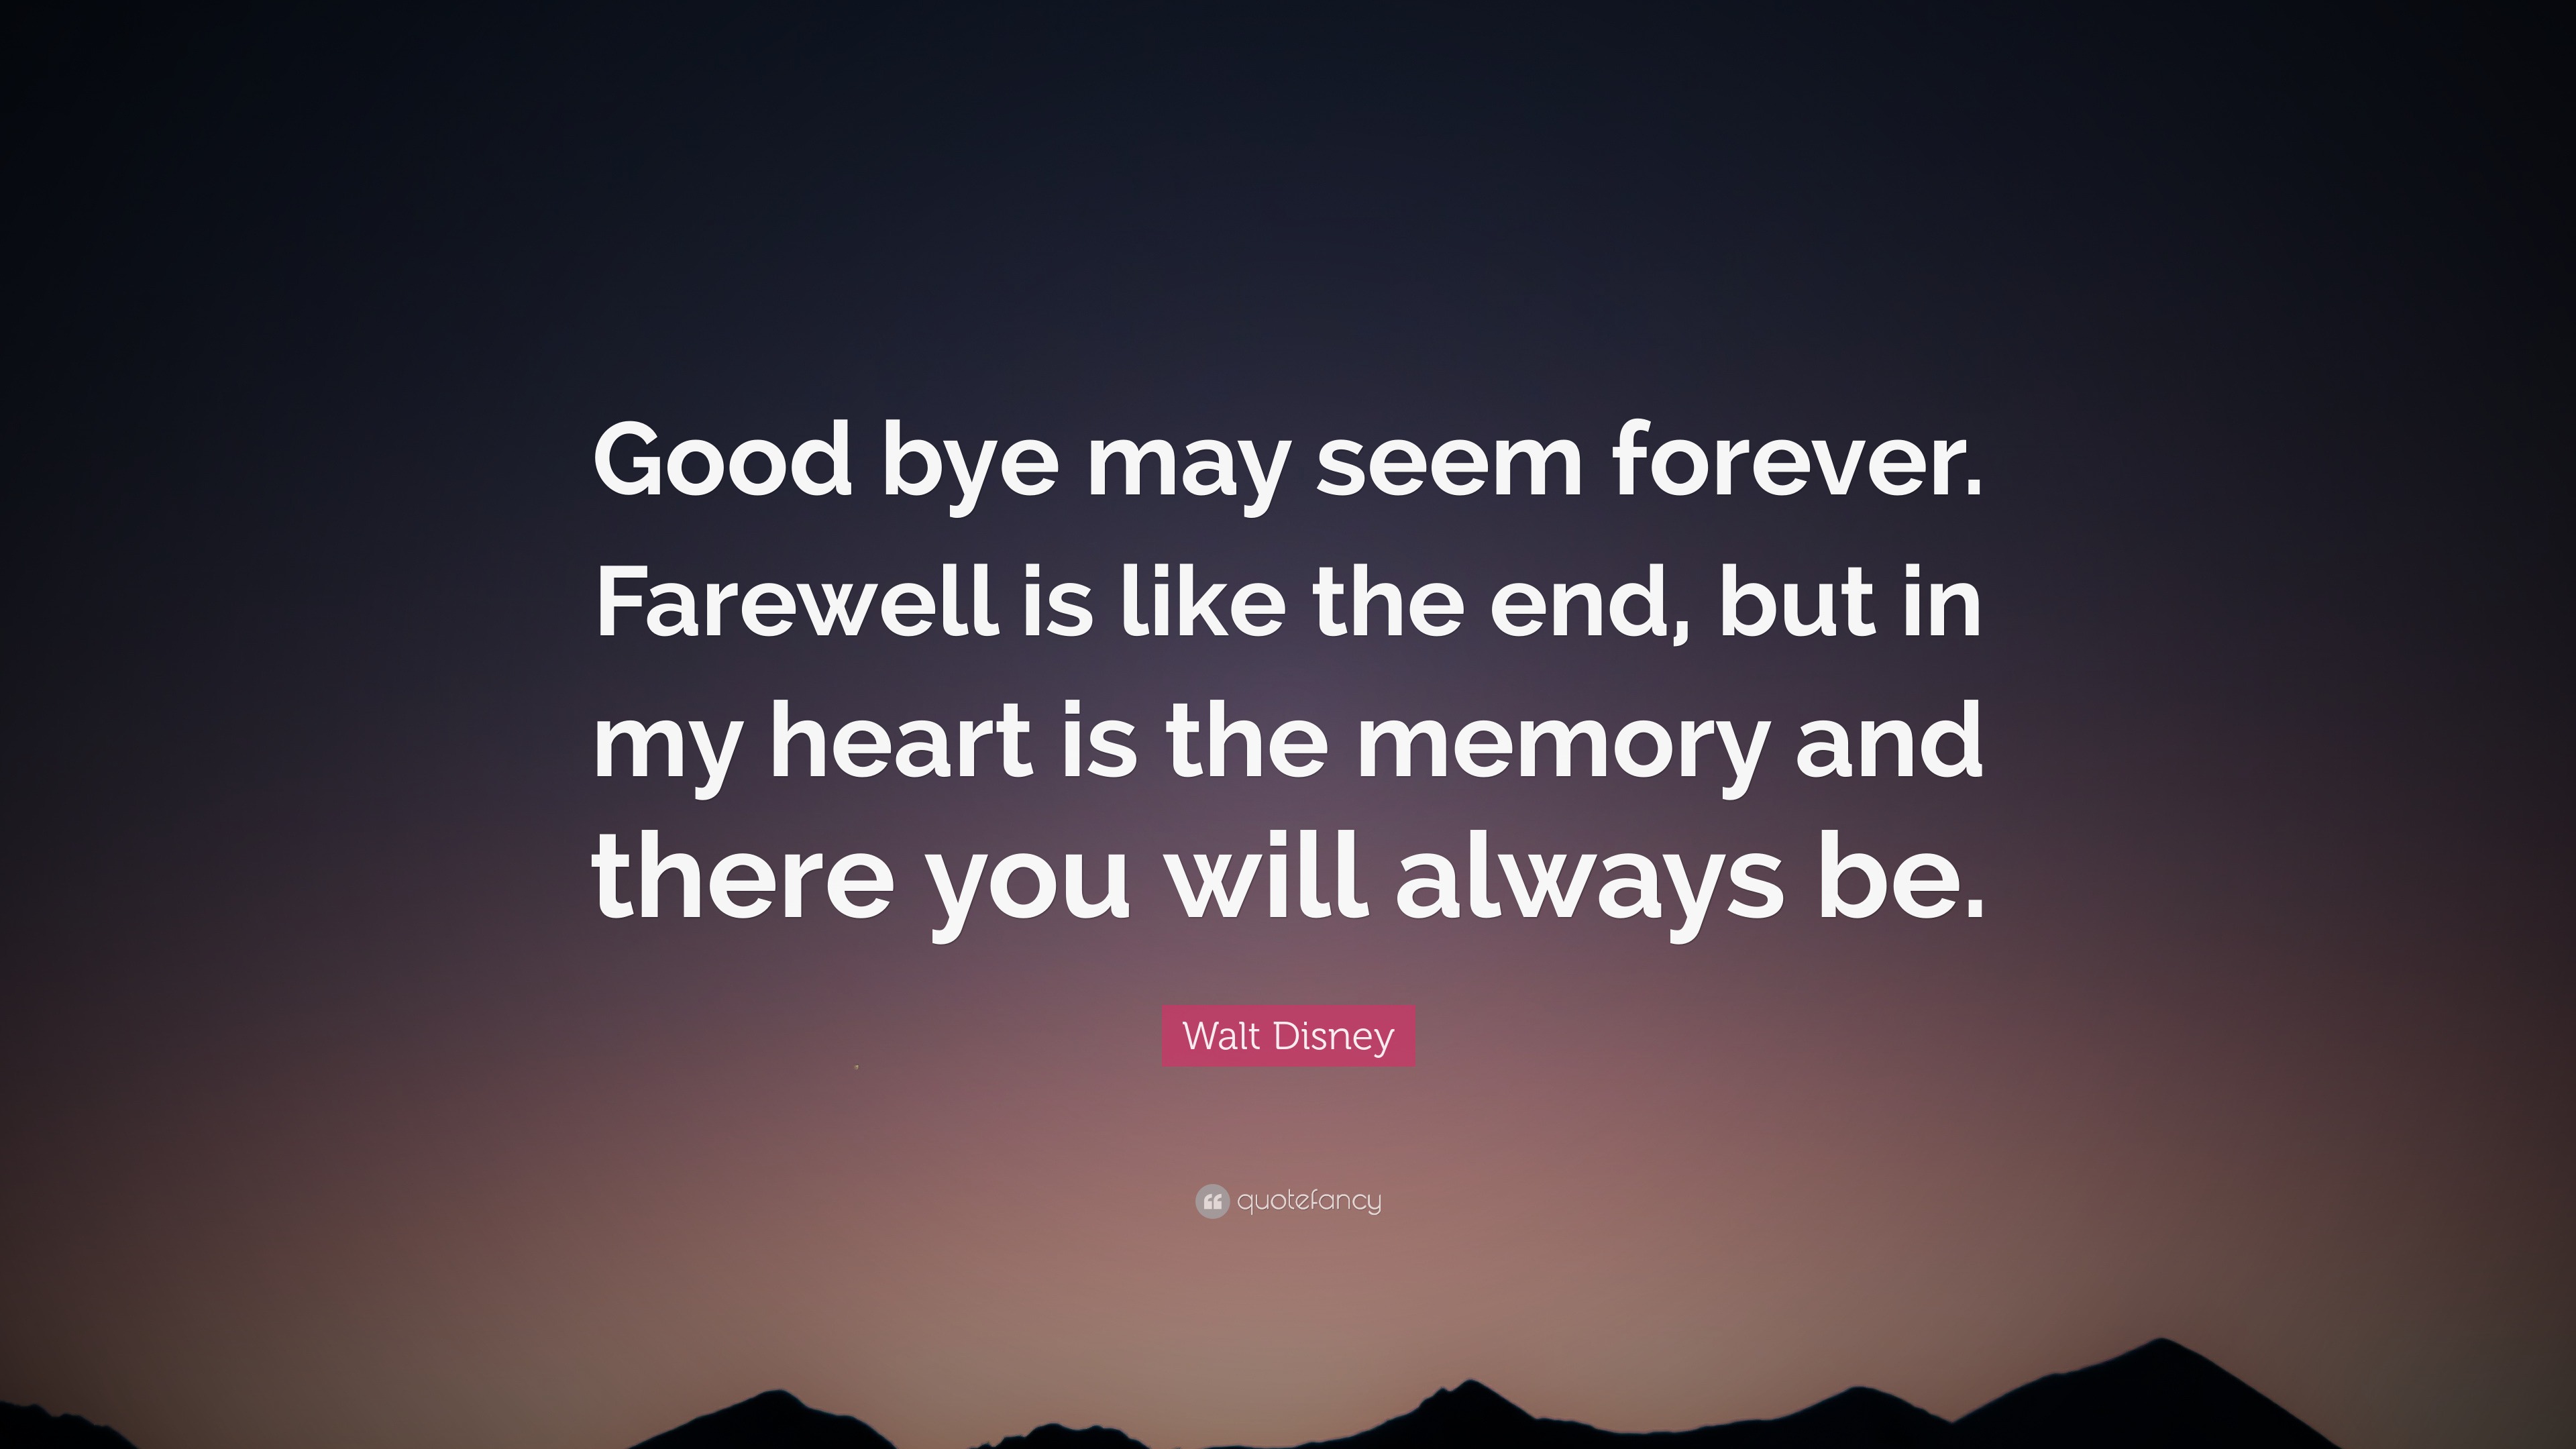 Walt Disney Quote: “Good bye may seem forever. Farewell is like the end ...